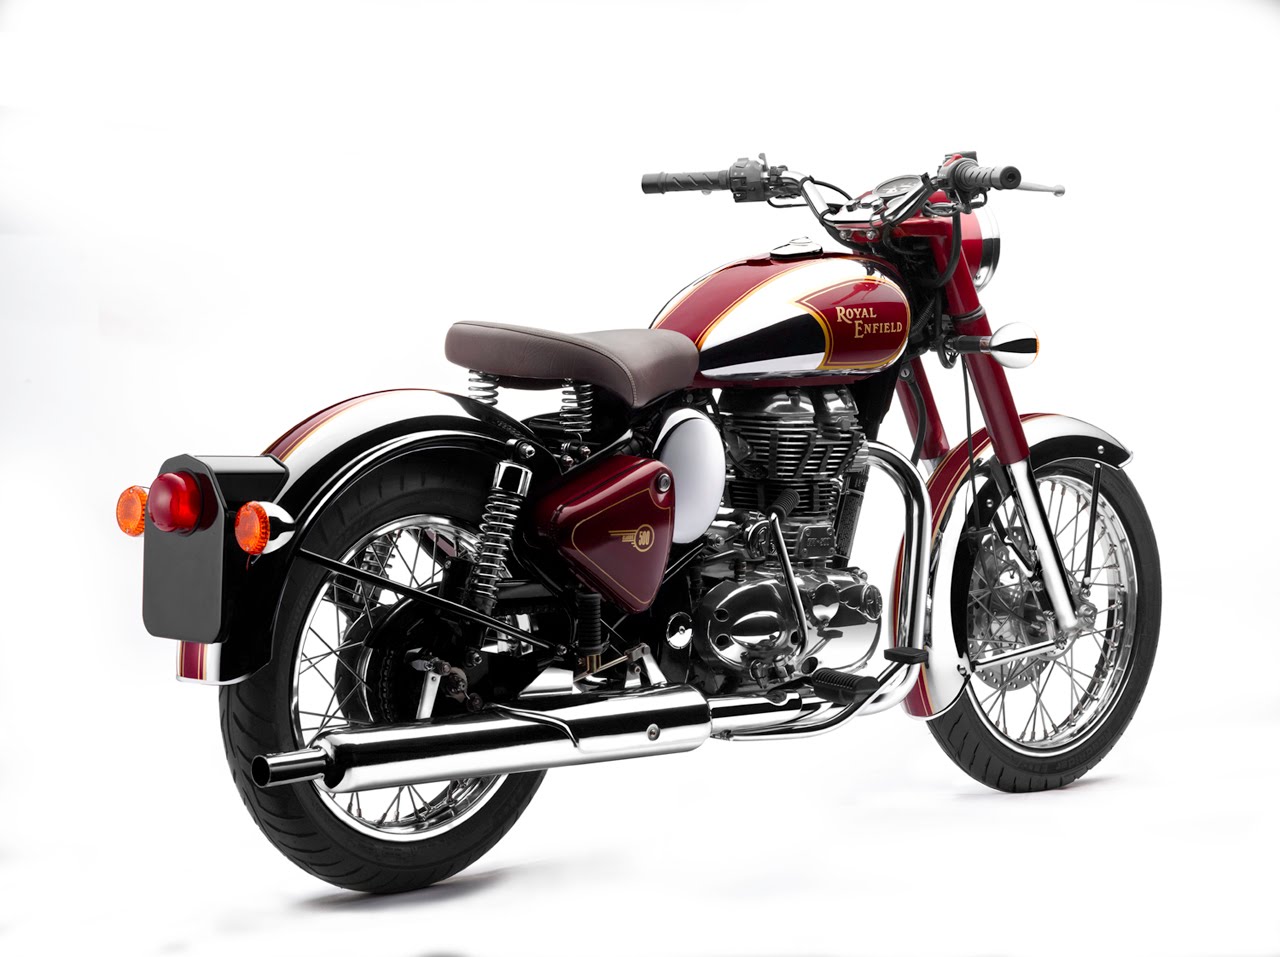 Royal Enfield - Royal Enfield Classic DELUX